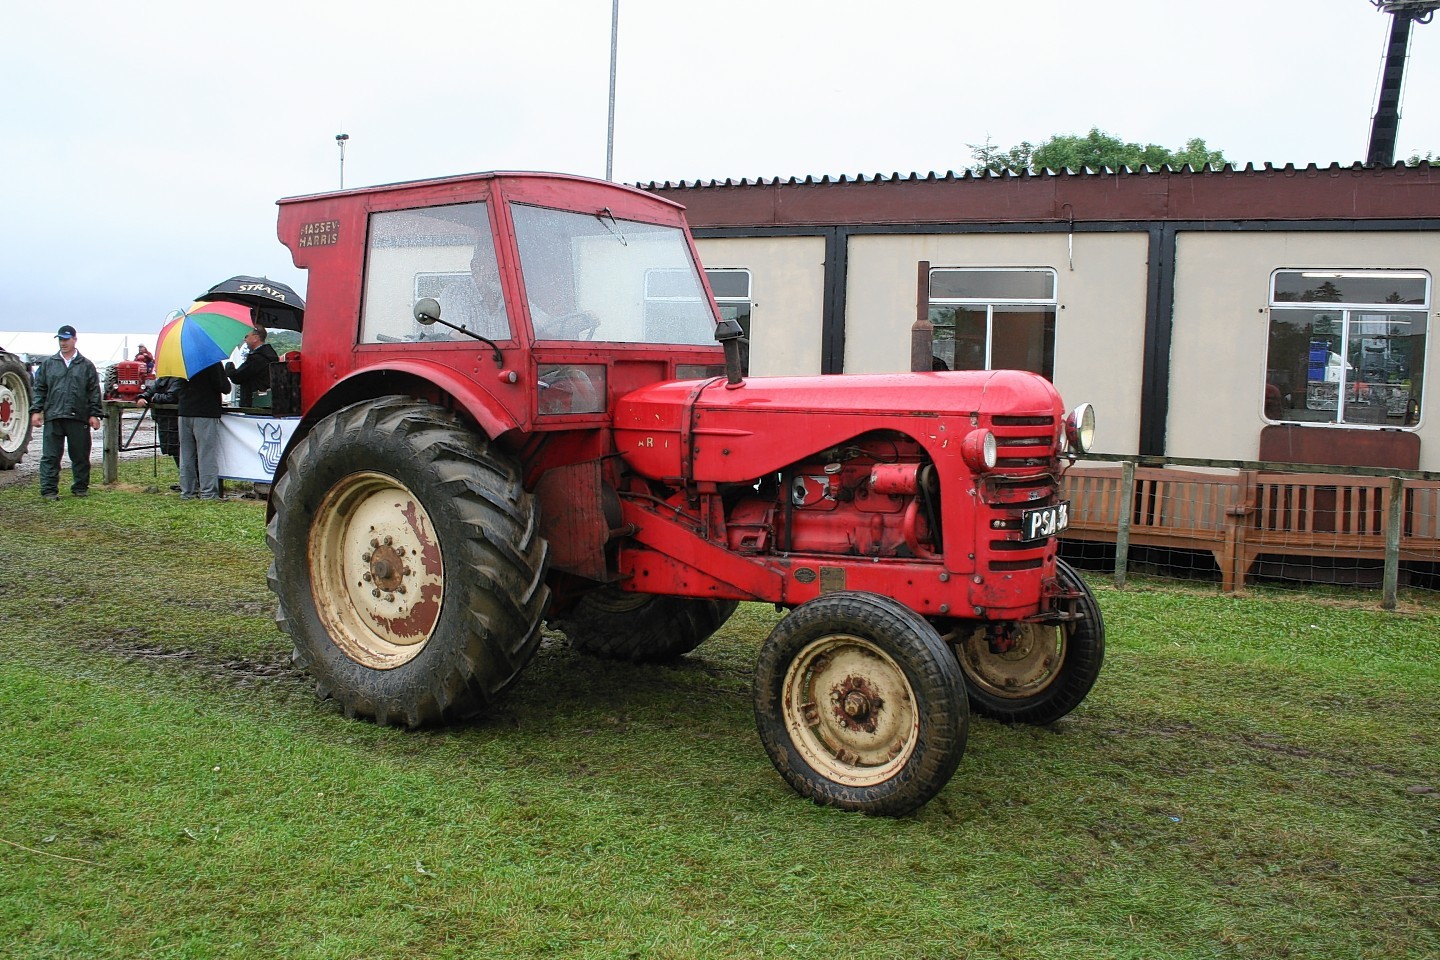 The second last Massey Harris tractor ever built in the UK was this 745 S